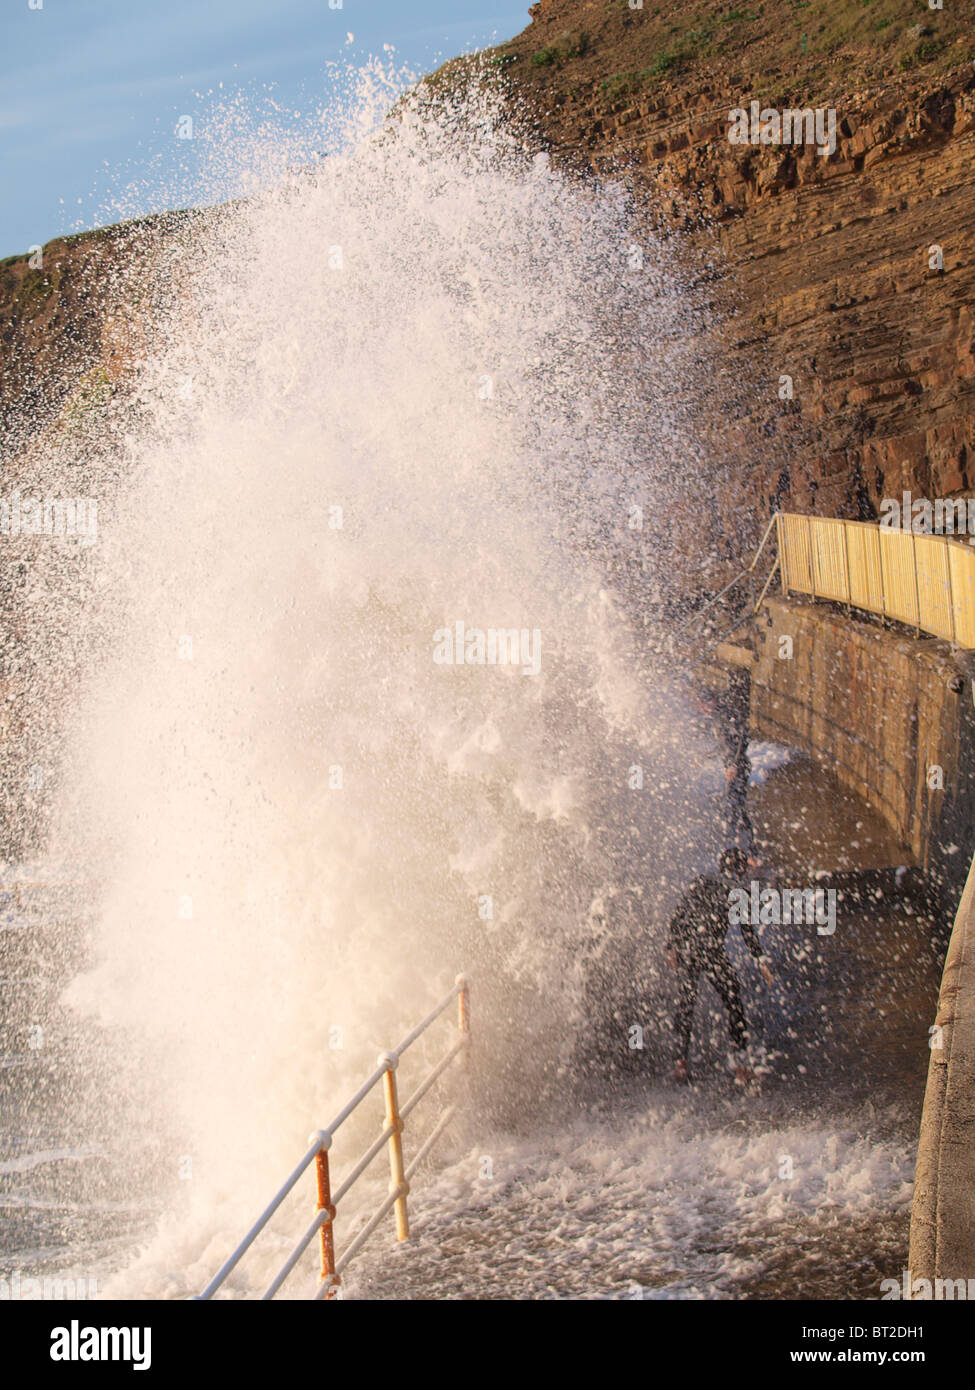 Large wave hitting wall and going over railings, Cornwall, UK Stock Photo